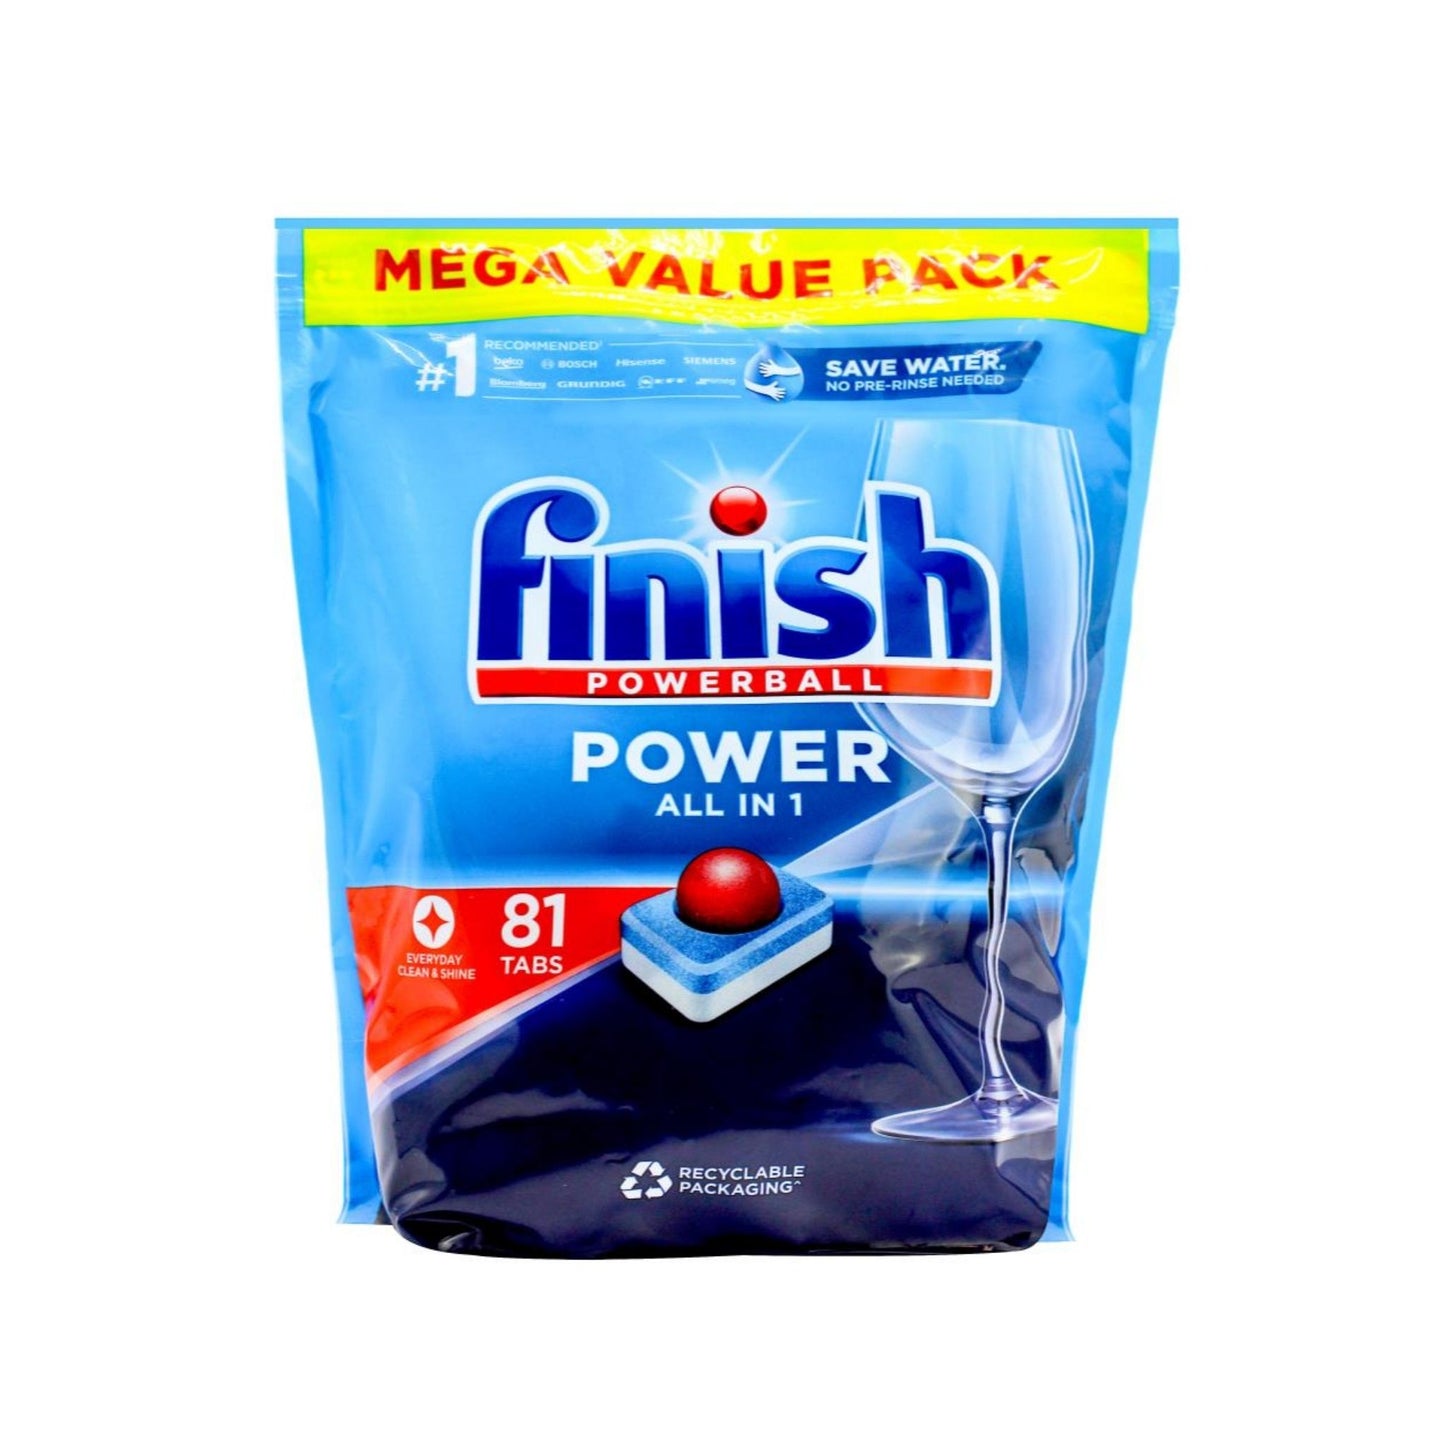 Finish Powerball Dishwashing Tablets Power All In 1 Mega Value Pack 81 Count x 4 Pack